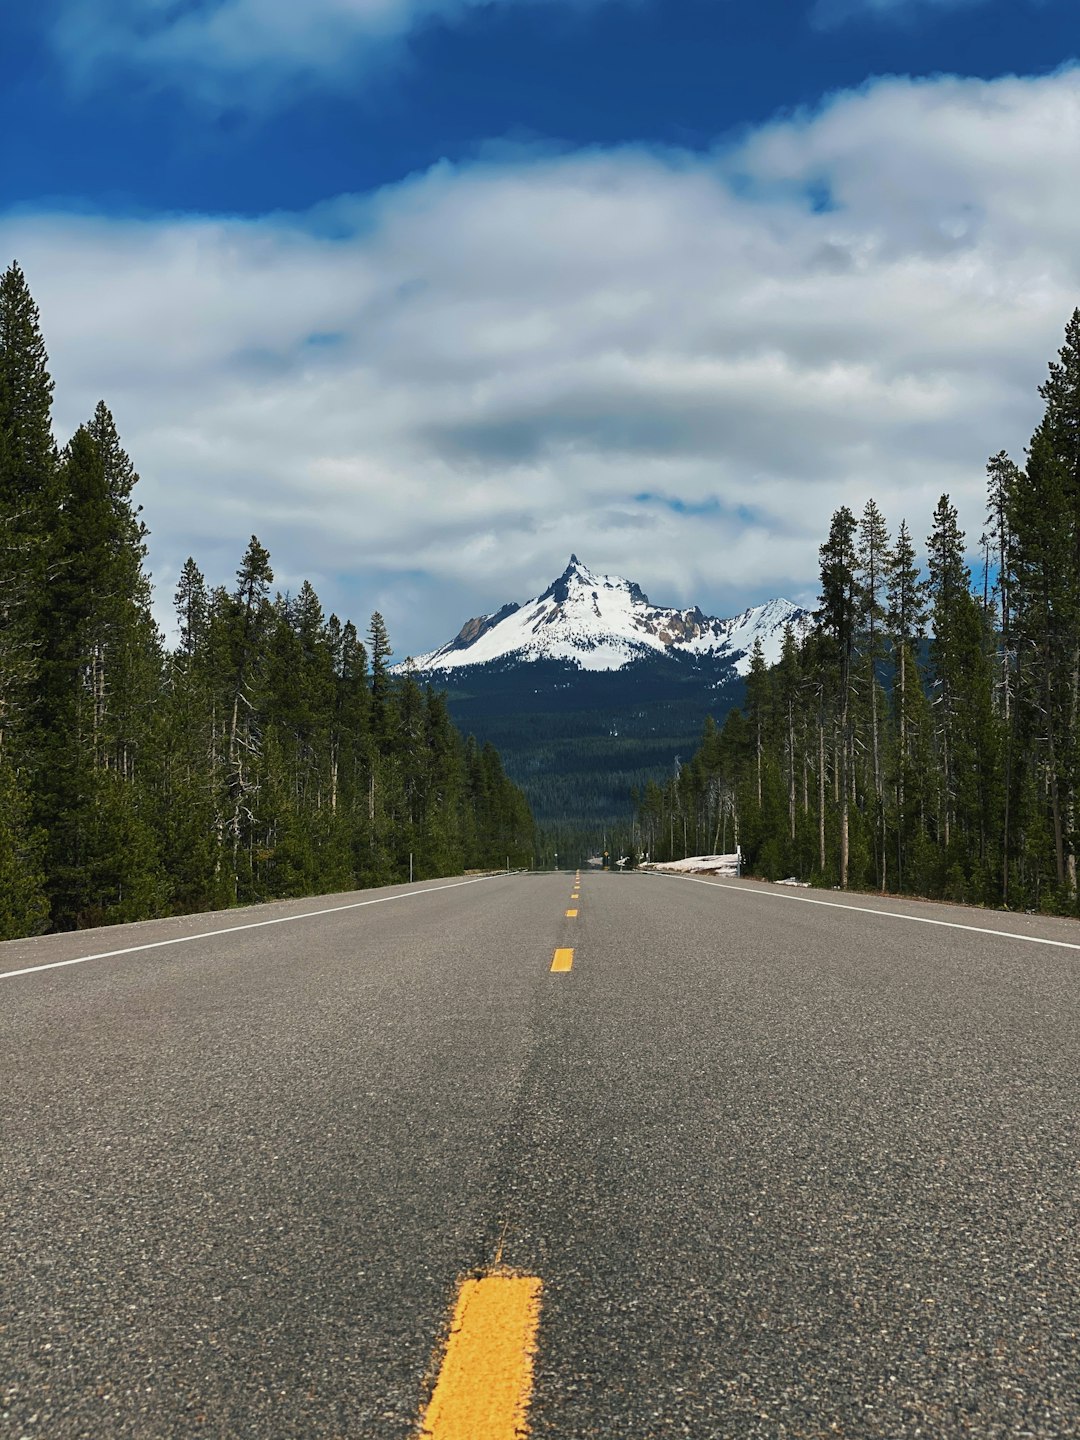 travelers stories about Road trip in Mount Thielsen, United States